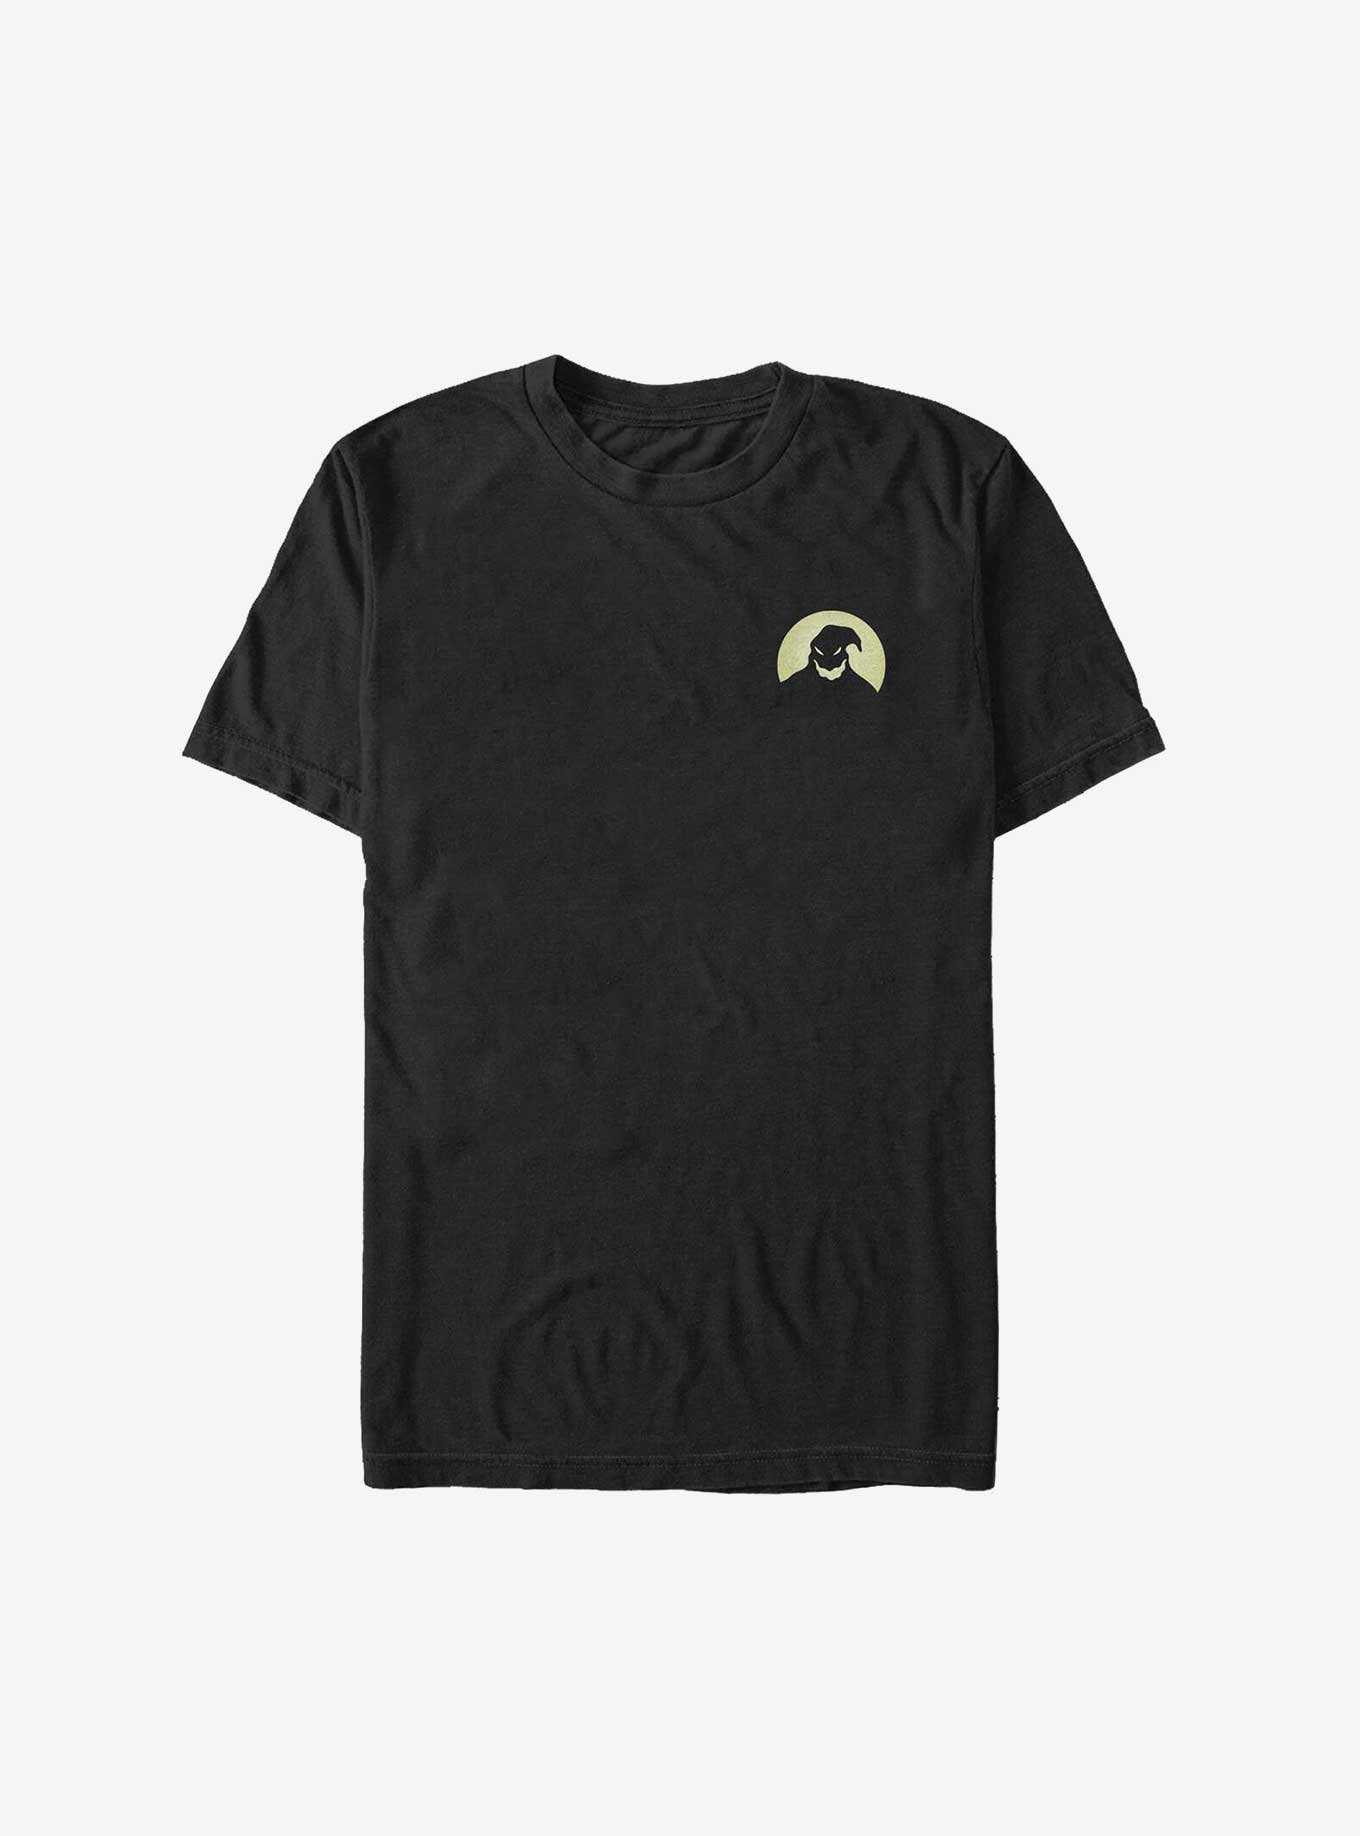 Disney The Nightmare Before Christmas Oogie Boogie Pocket Big & Tall T-Shirt, , hi-res